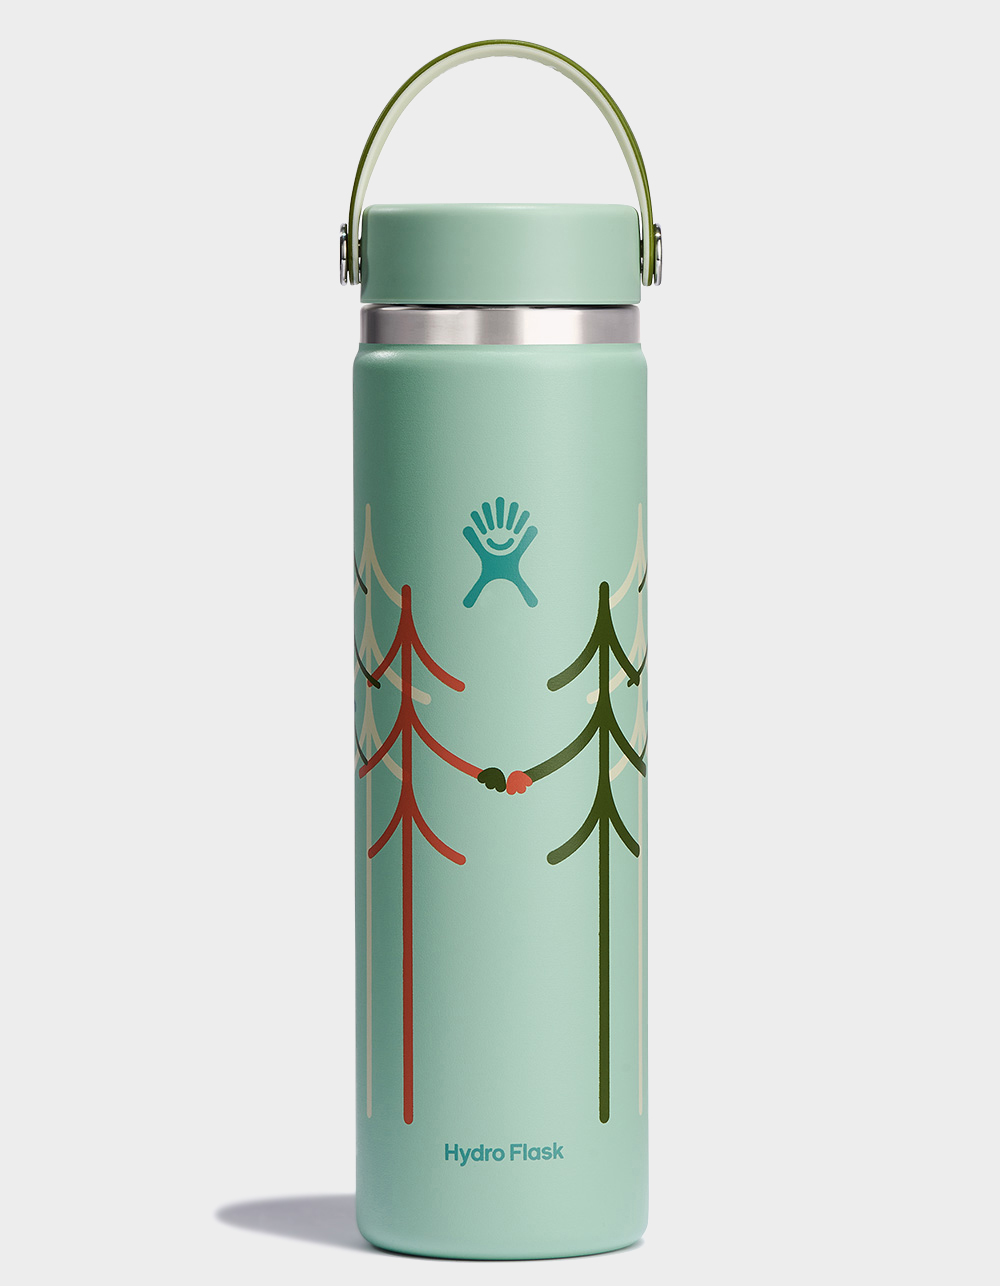 Hydro Flask on X: Cheers to Sunday Funday! Did you know our